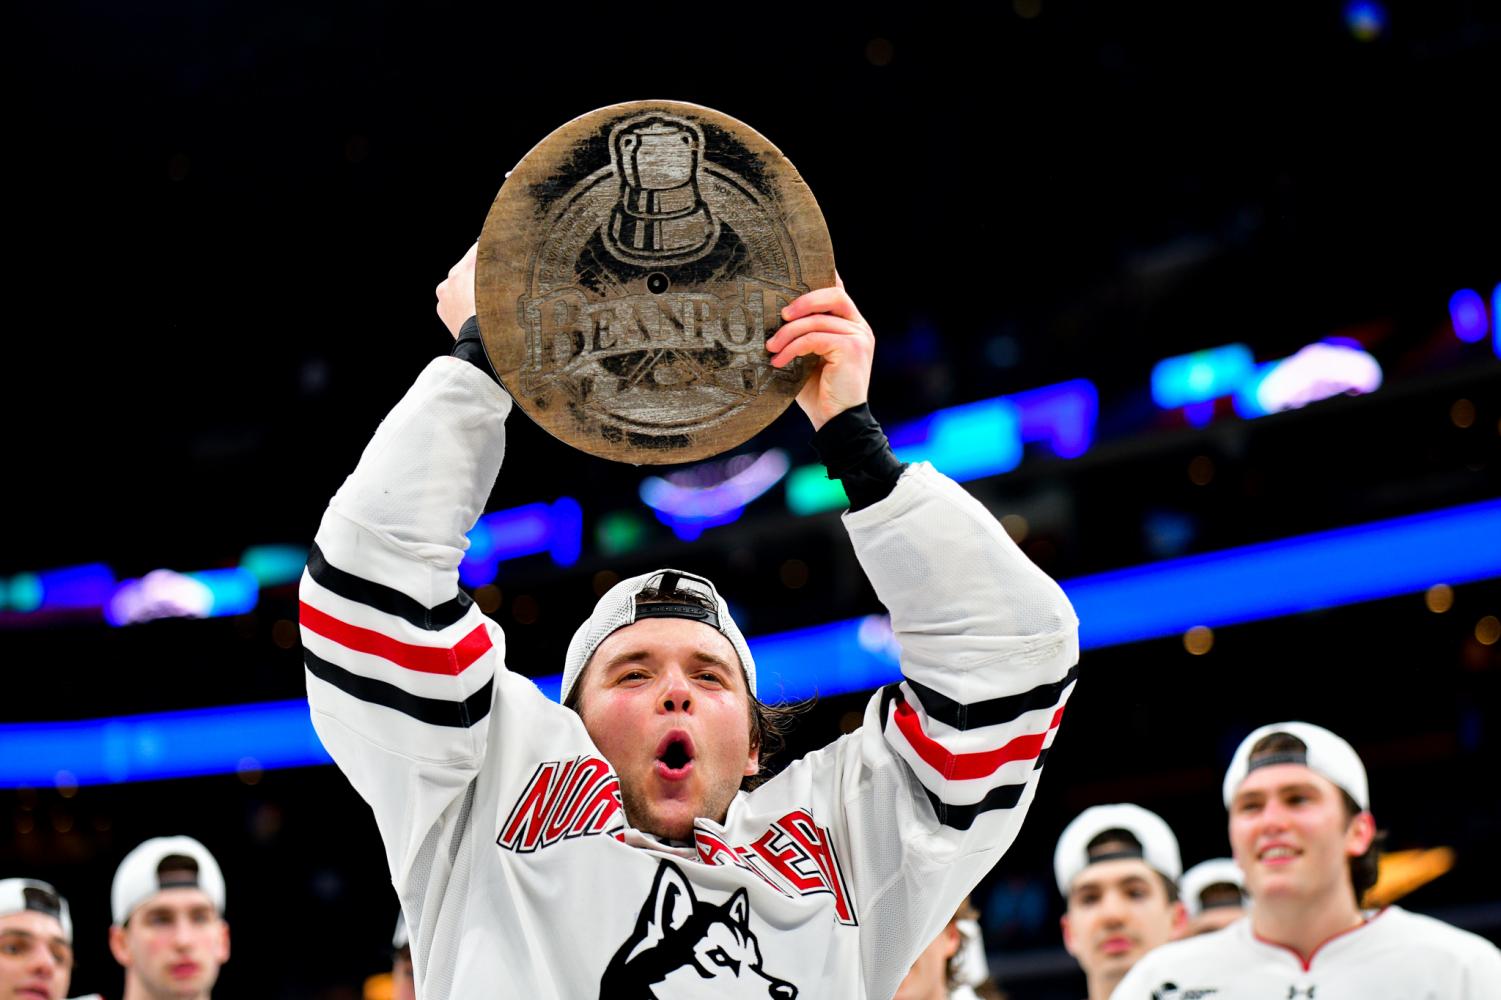 Northeastern 3-Peats at Beanpot with 5-4 Double OT Win over BU, BU Today